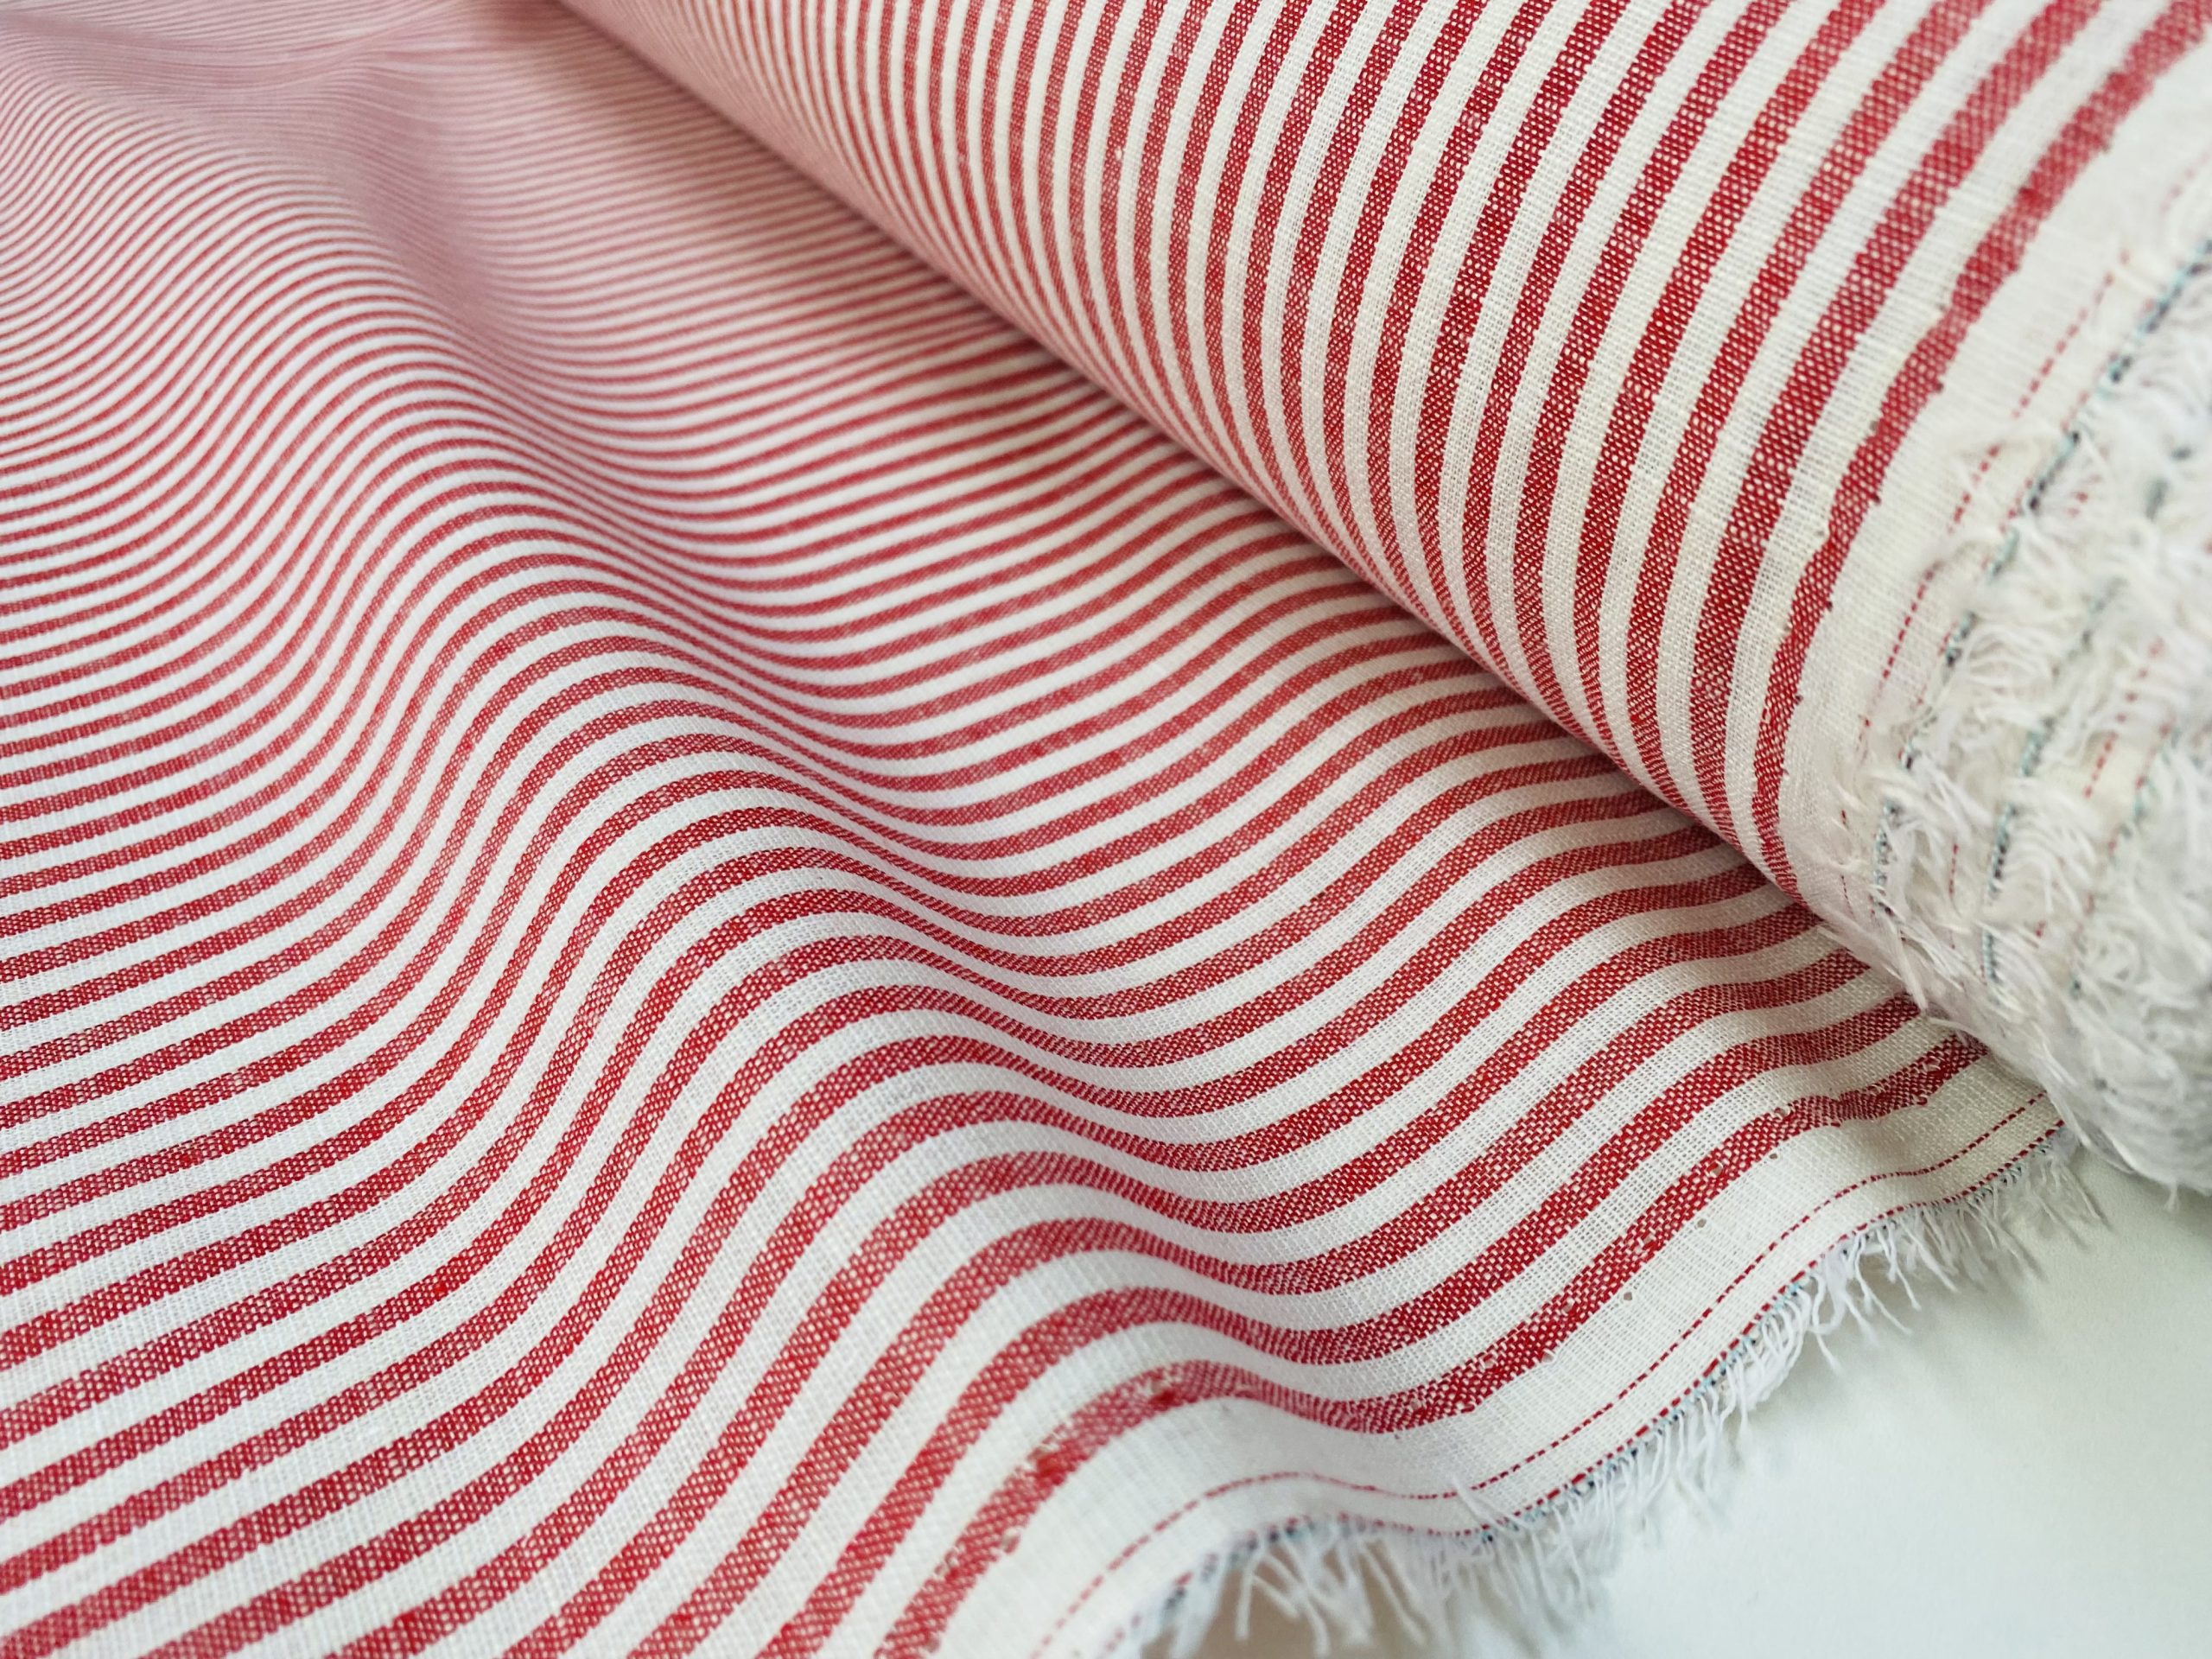 Candy Stripe Linen Fabric Light Cotton Material Cute Striped White Linen  Home Decor, Dressmaking - 59 or 150cm wide - Red - Lush Fabric